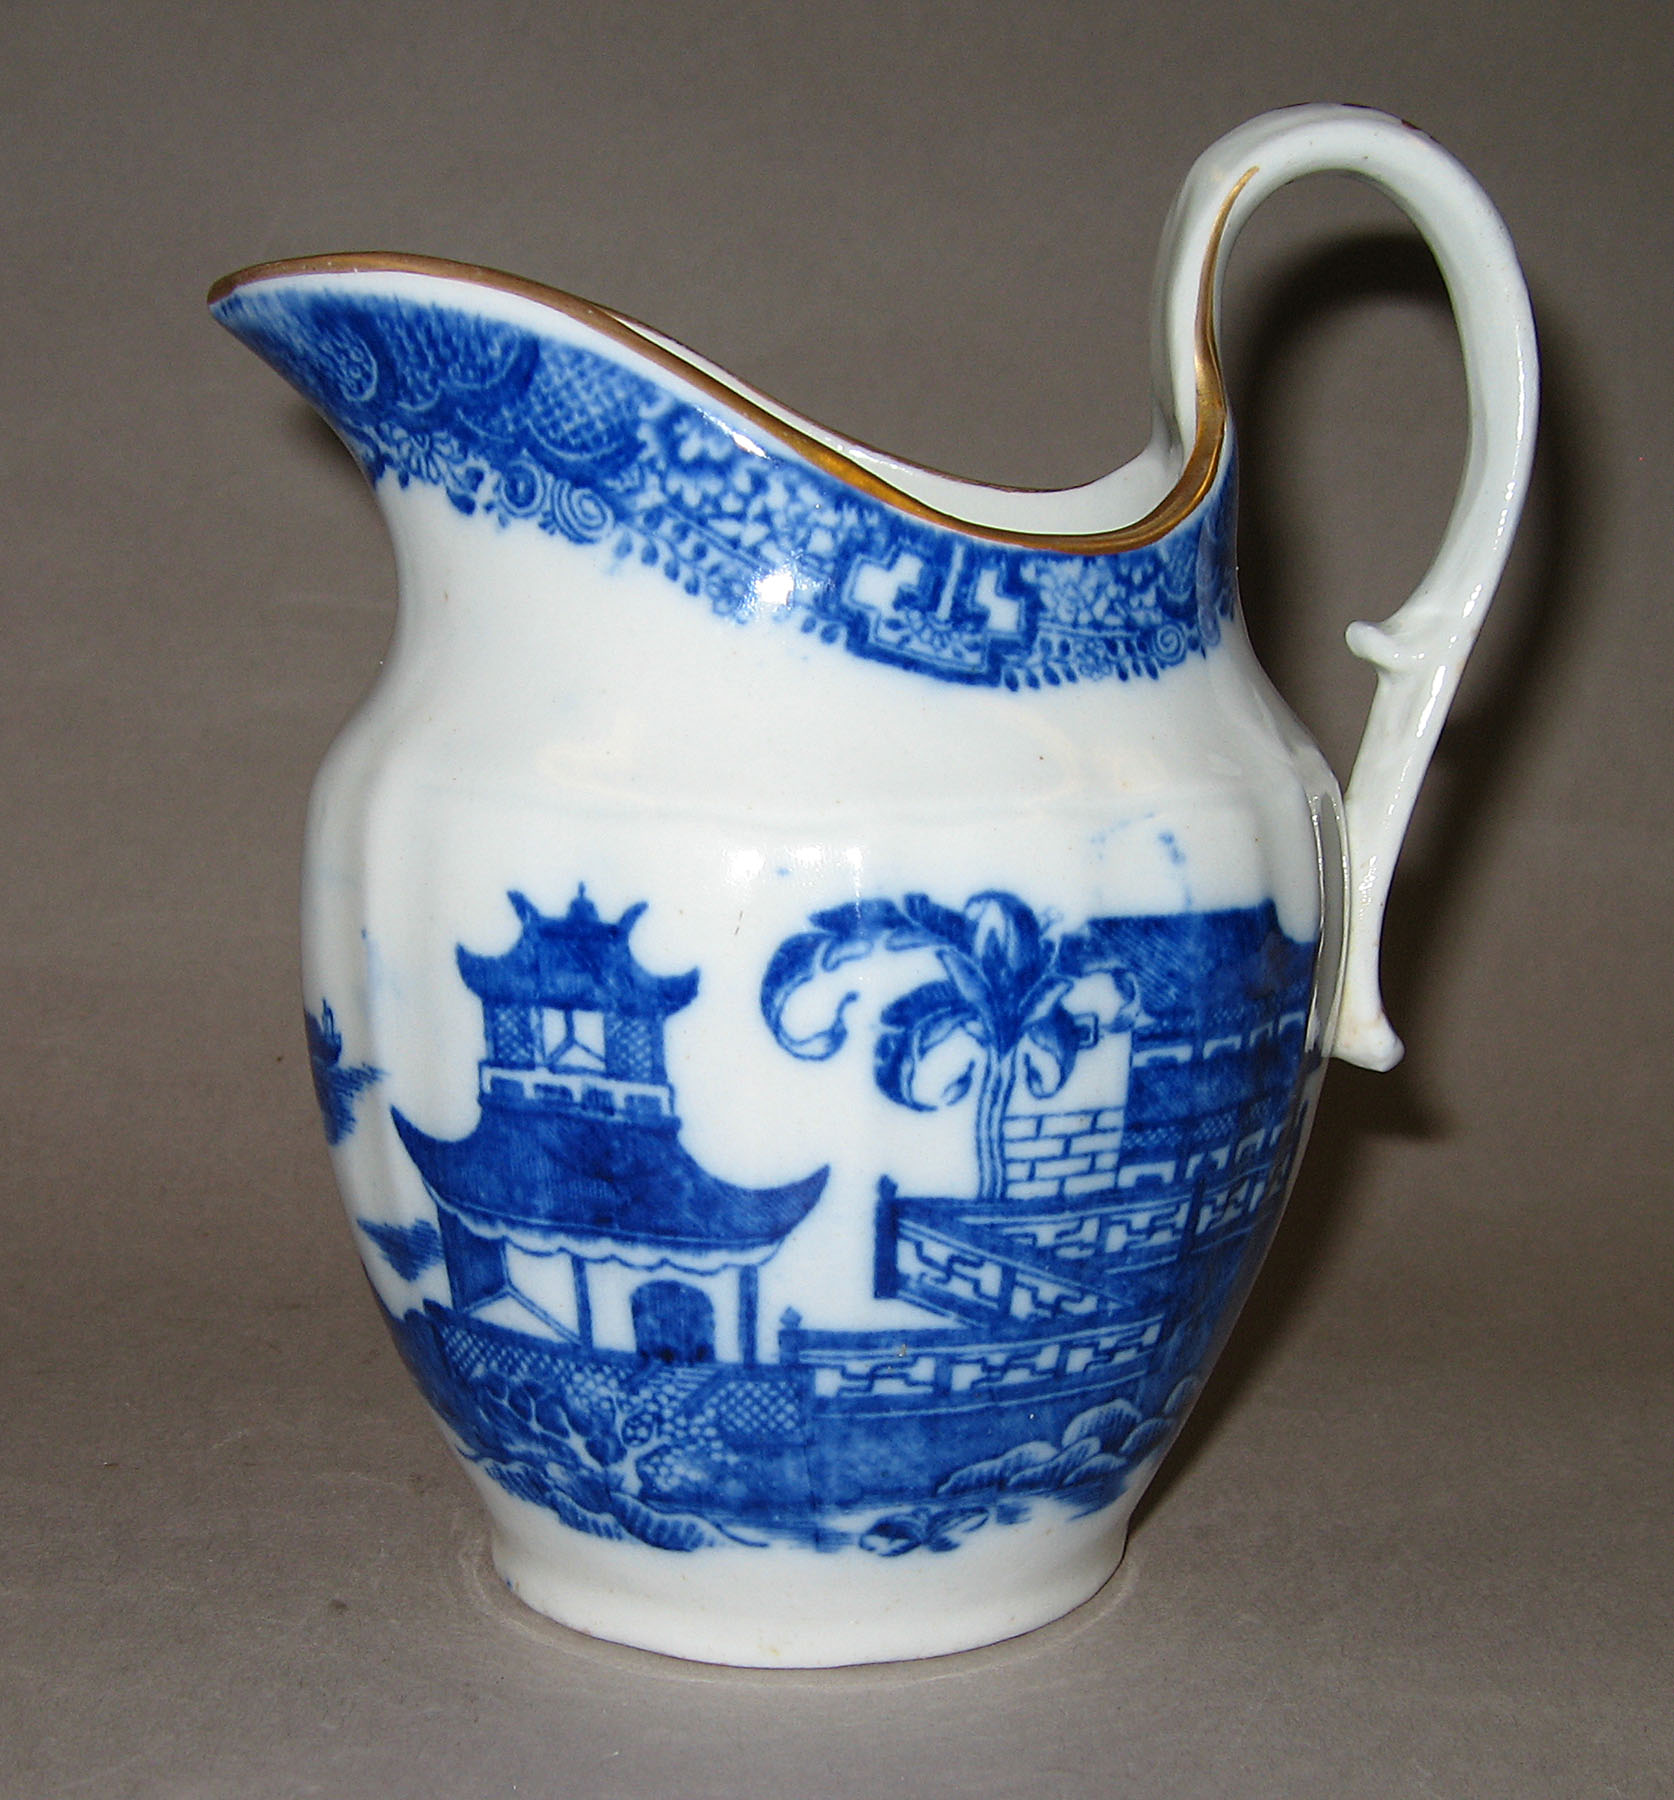 1975.0085.003 Jug (Handle to right)